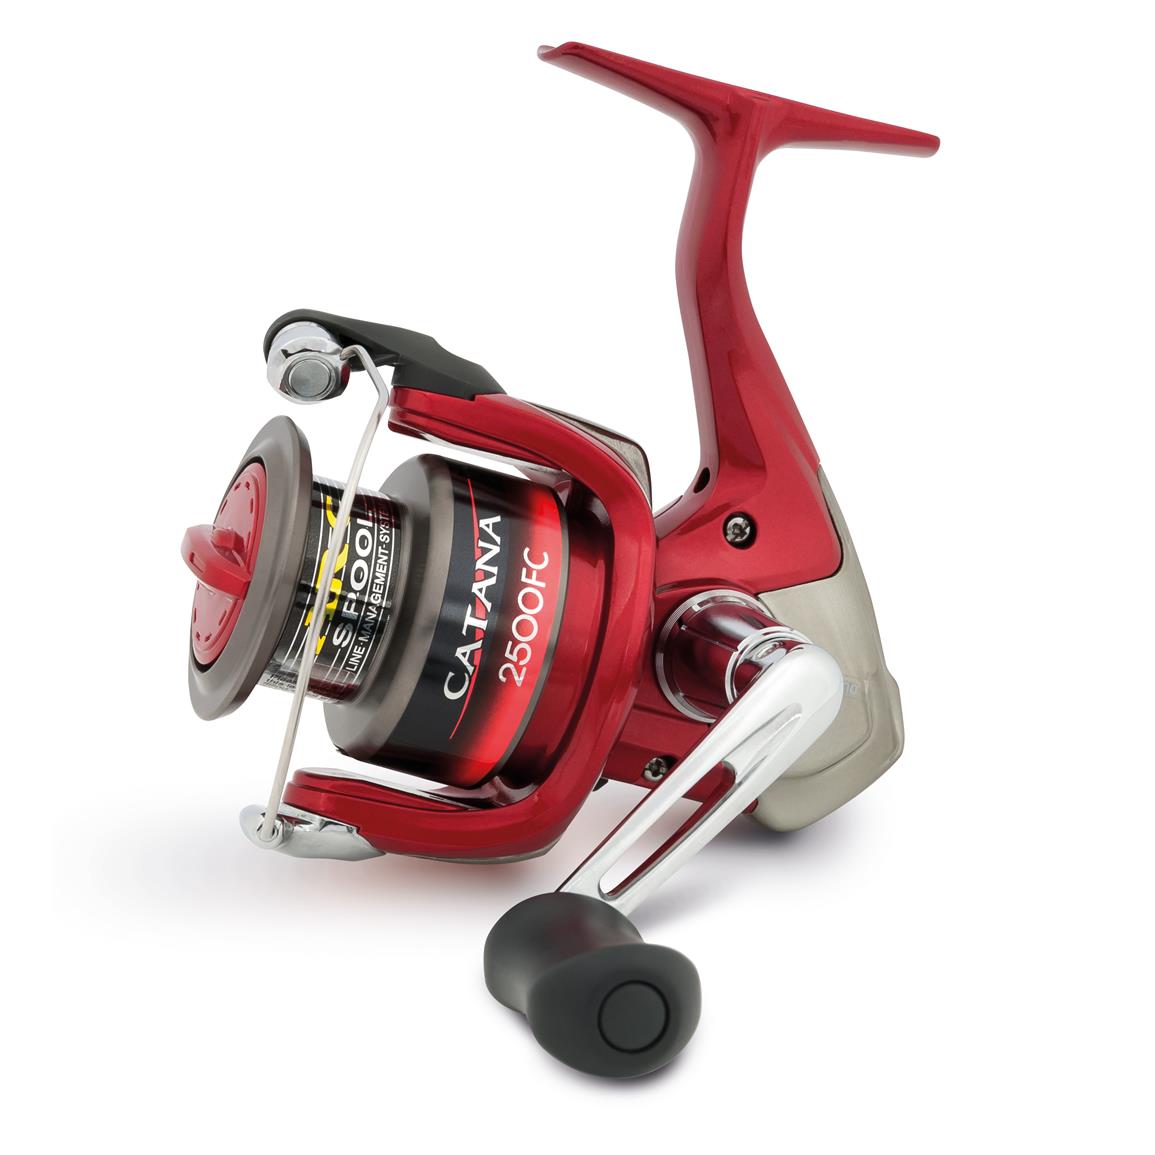 shimano-catana-spinning-reel-660762-spinning-reels-at-sportsman-s-guide